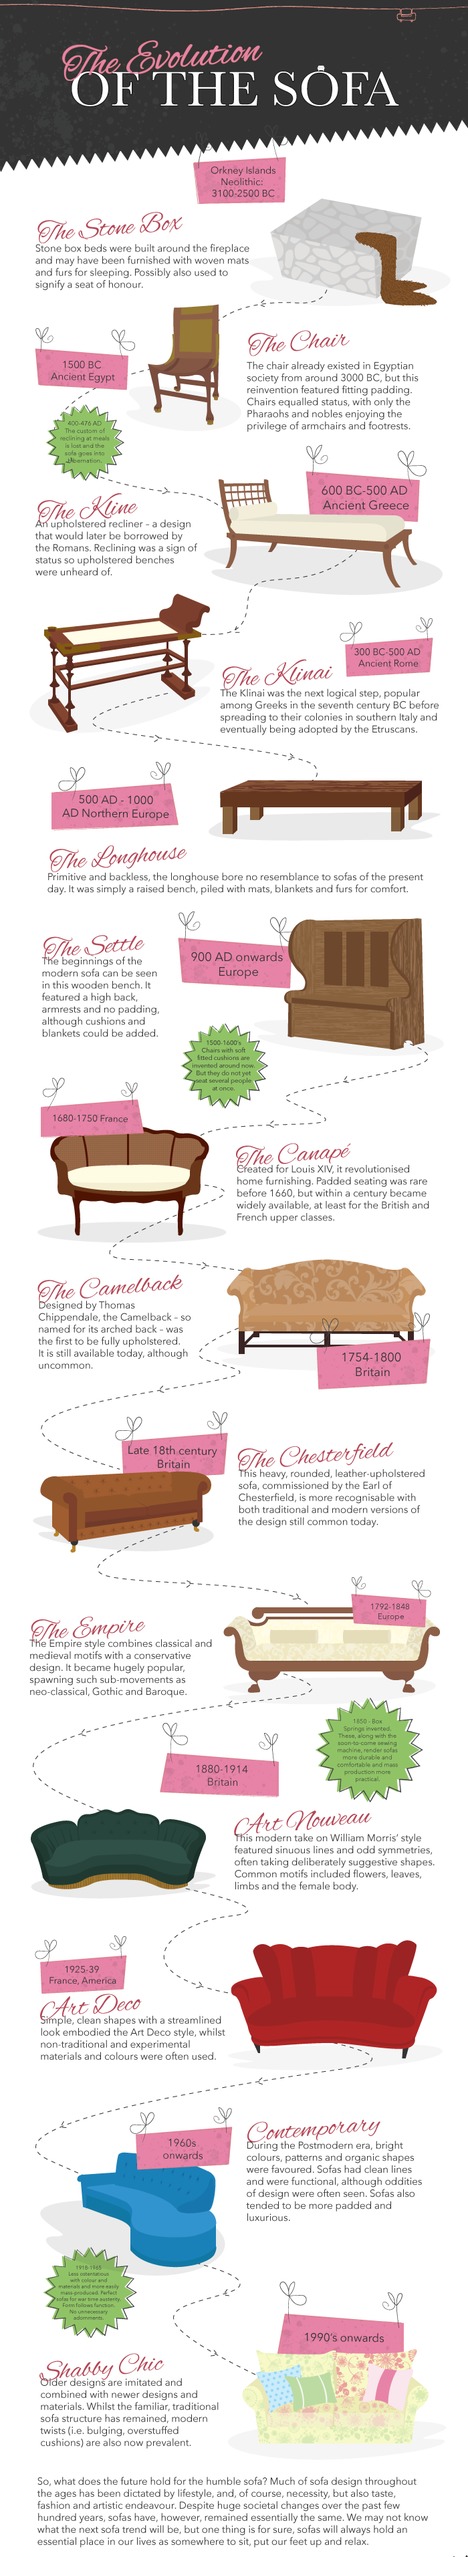 The Evolution of the Sofa